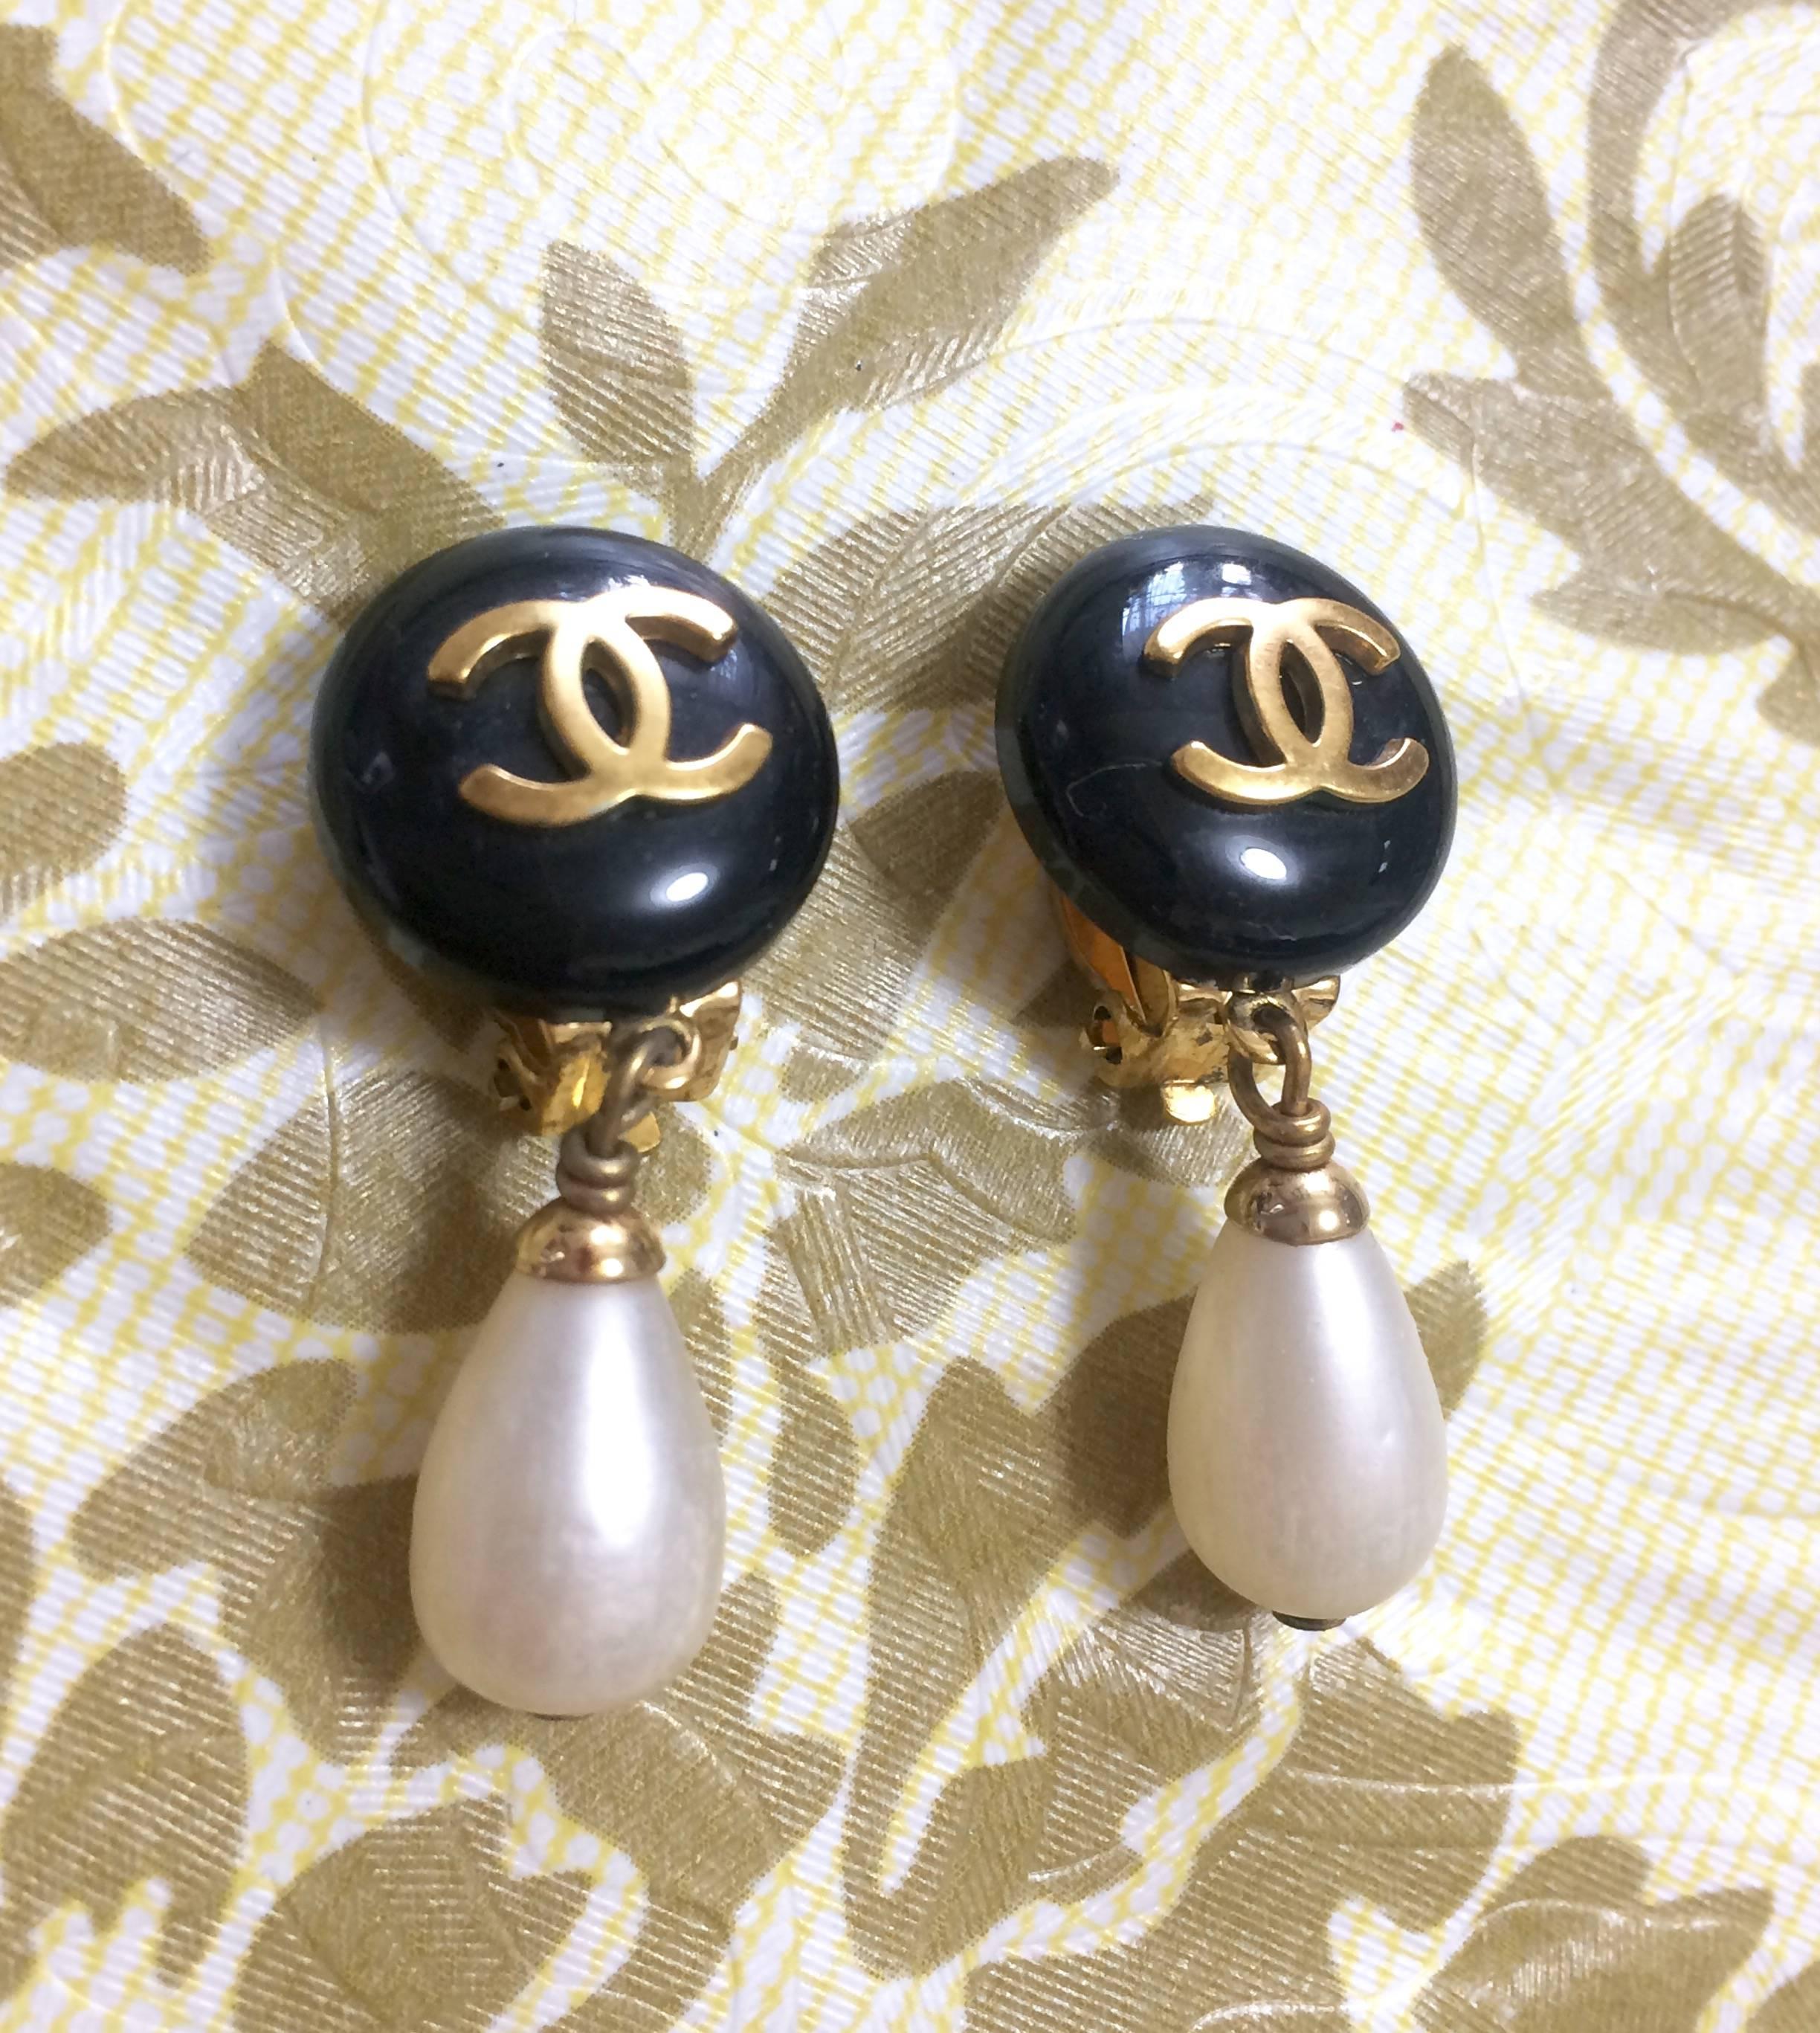 1990s. Vintage CHANEL teardrop white faux pearl earrings with black and golden CC mark on top. Chanel dangling earrings.

Introducing a vintage CHANEL faux teardrop pearl earrings with black round and golden CC marks on top. 
 
Wearing these